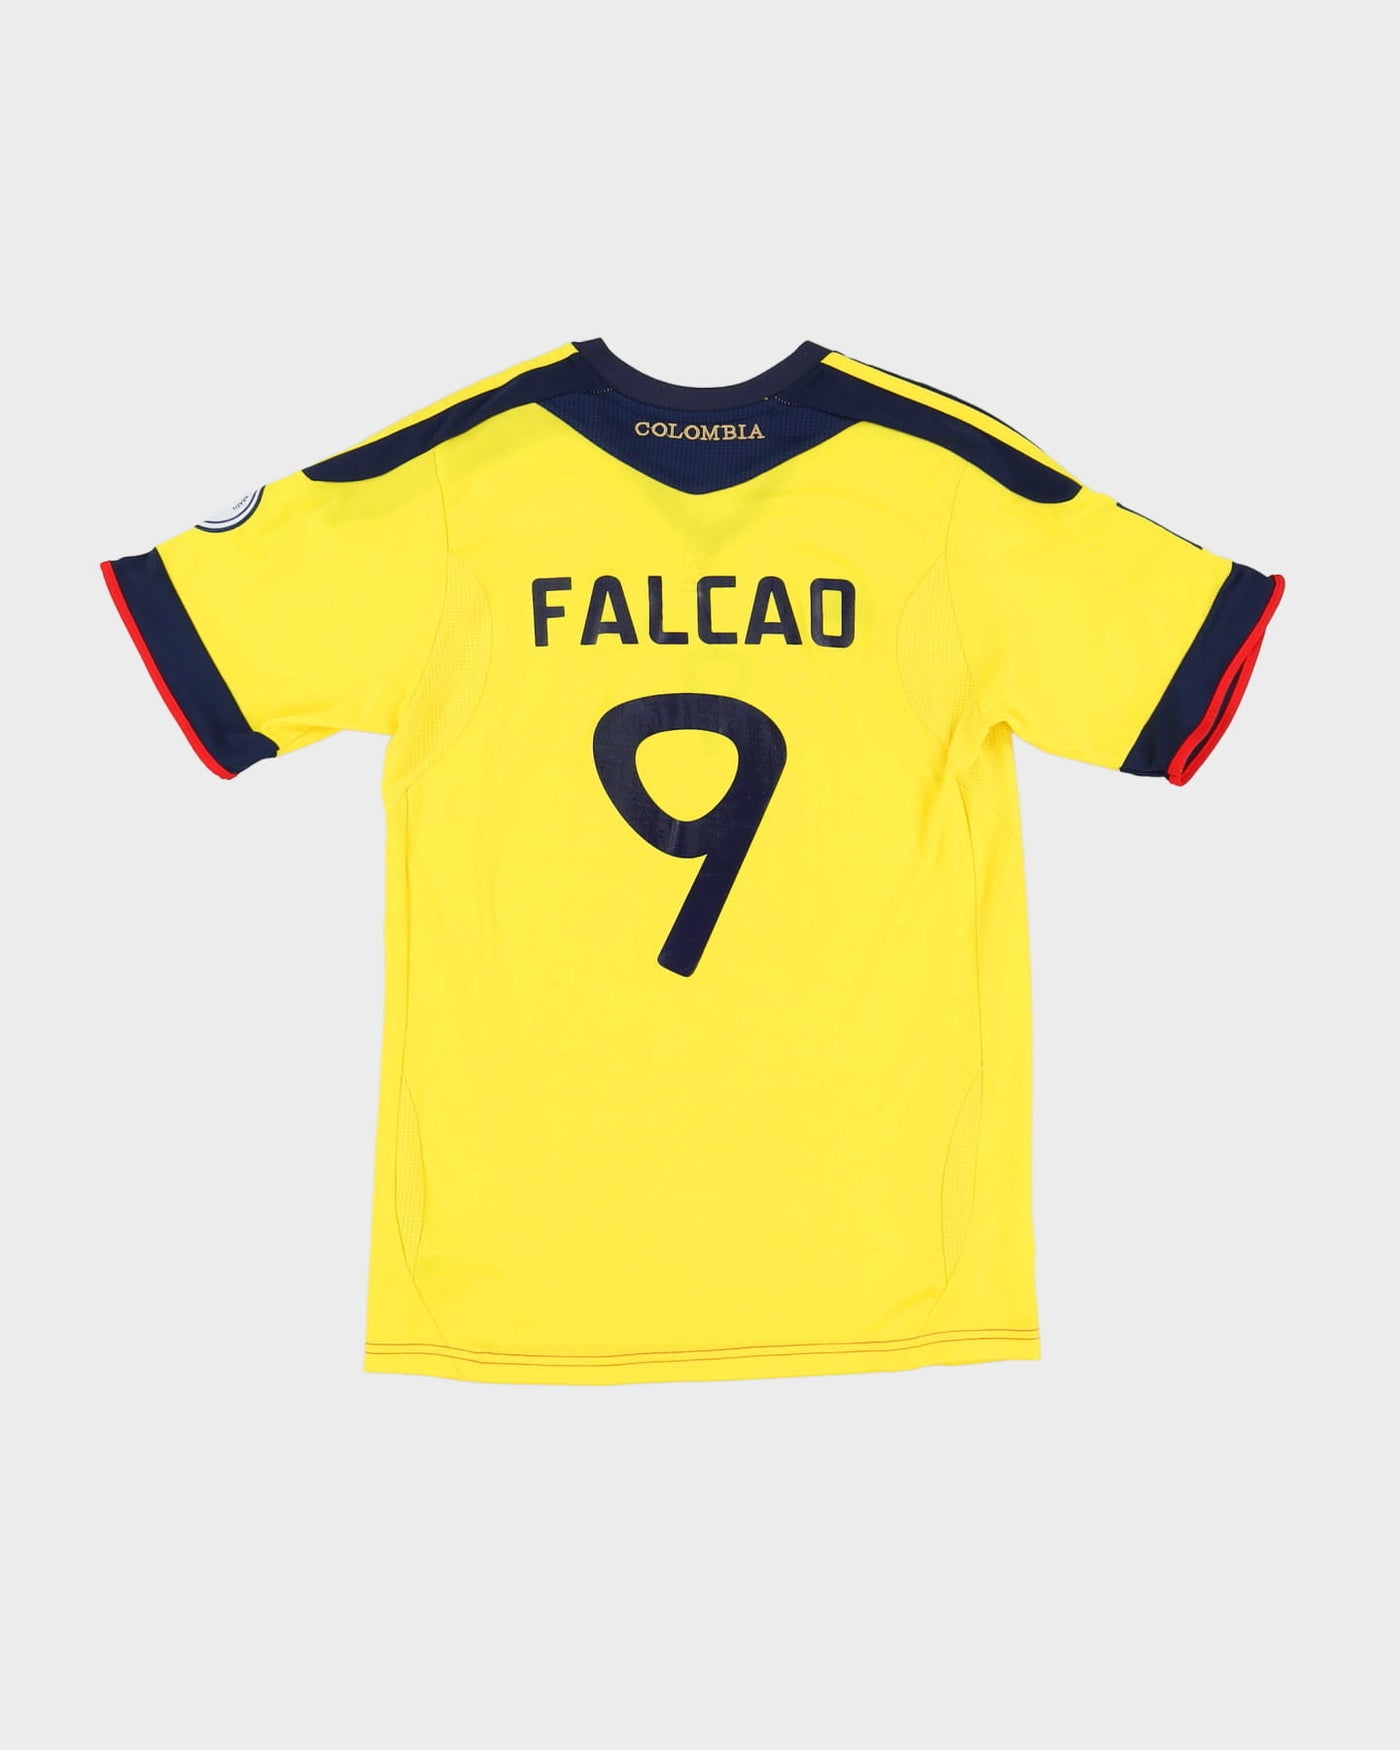 Adidas Falcao Columbia 2014 World Cup Qualifiers Yellow Football Shirt / Jersey - S